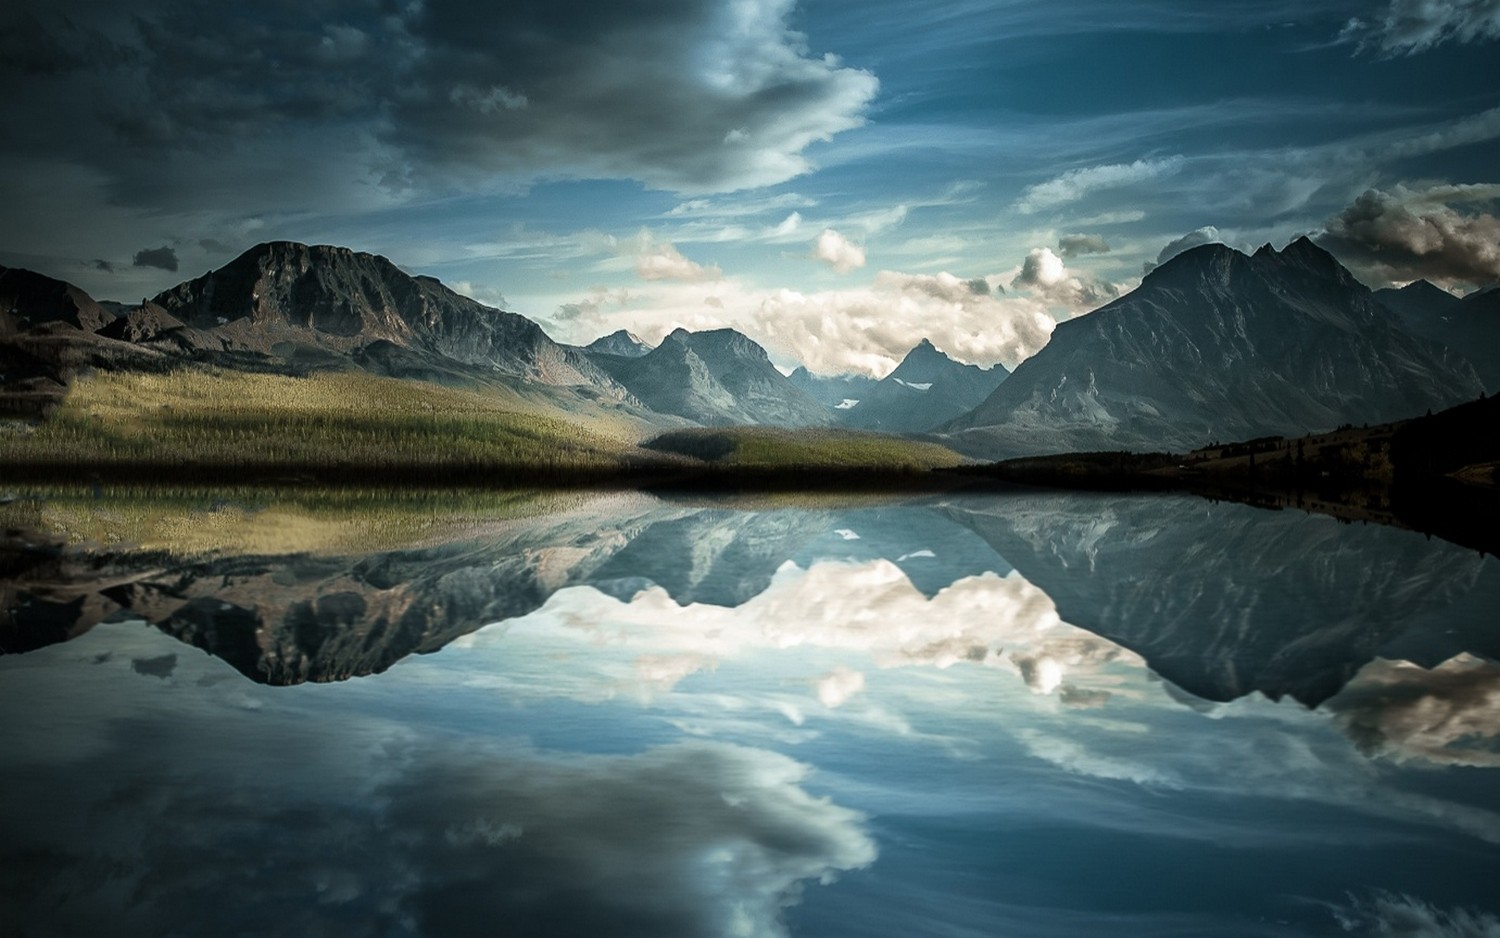 General 1500x938 nature landscape lake reflection calm mountains clouds water